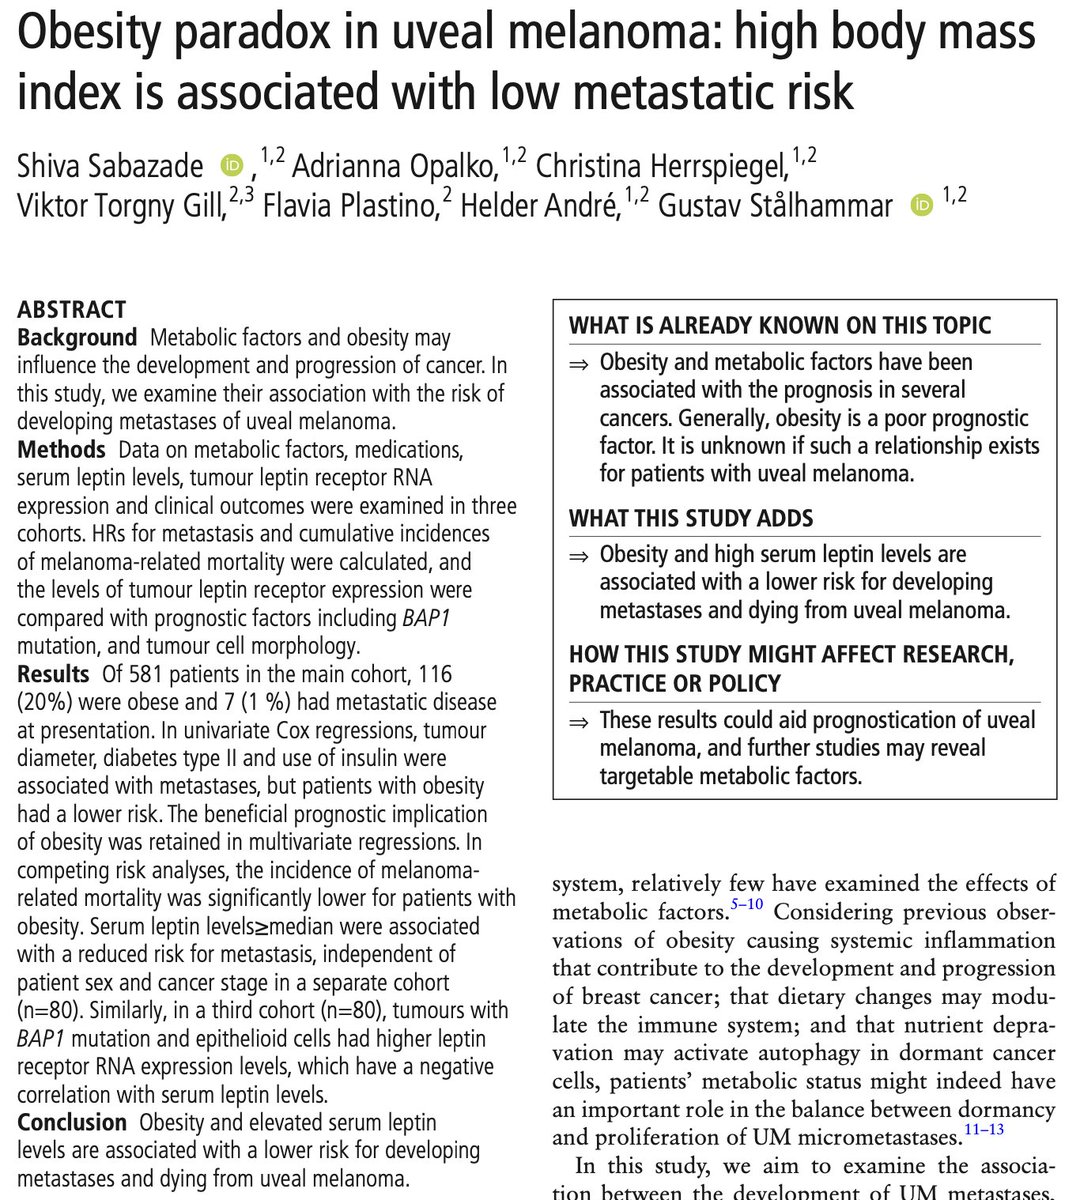 We have just discovered that obesity is associated with a lower risk of dying from uveal melanoma! This is quite surprising, and literally the opposite of what we hypothesized when we started this project. Let me explain (1/10) bjo.bmj.com/content/early/… dx.doi.org/10.1136/bjo-20…